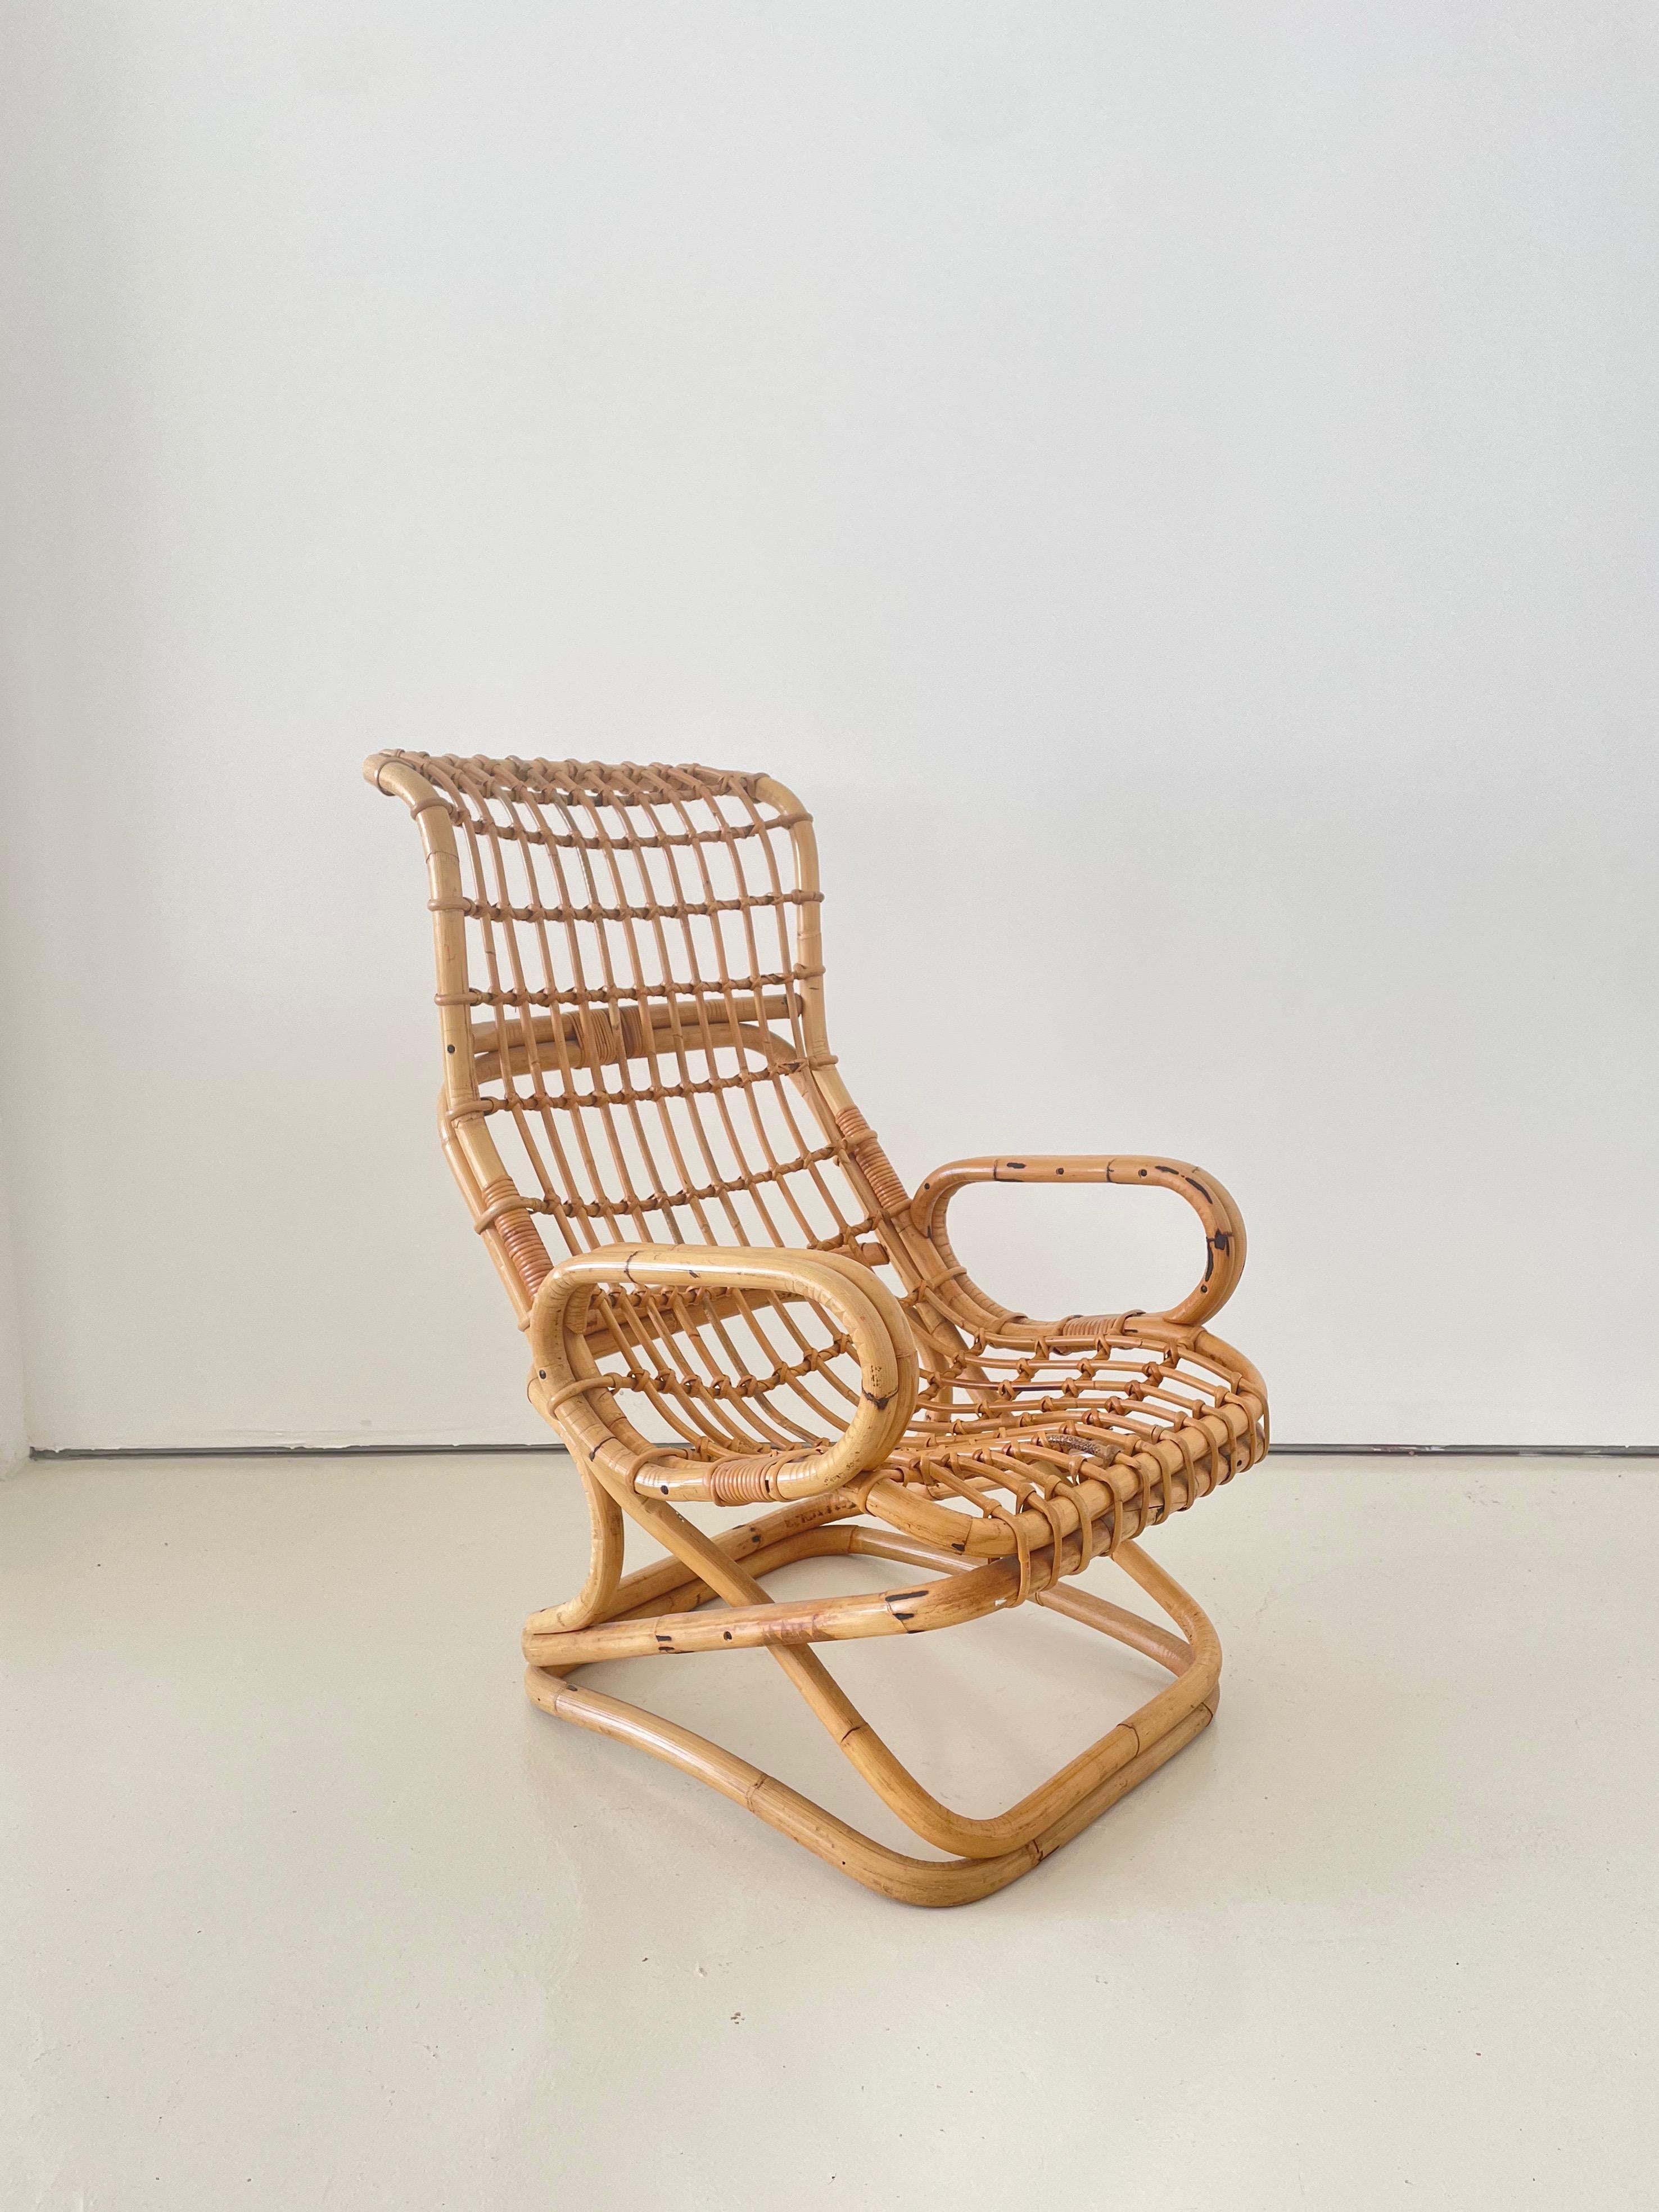 Midcentury, Italian chair designed by Tito Agnoli for Bonacina

Bent Rattan and woven Manilla grassa frame

Minor flaking of the clear coat on the back of the chair (see images)

No structural damage or large cracks of any kind

Sourced in